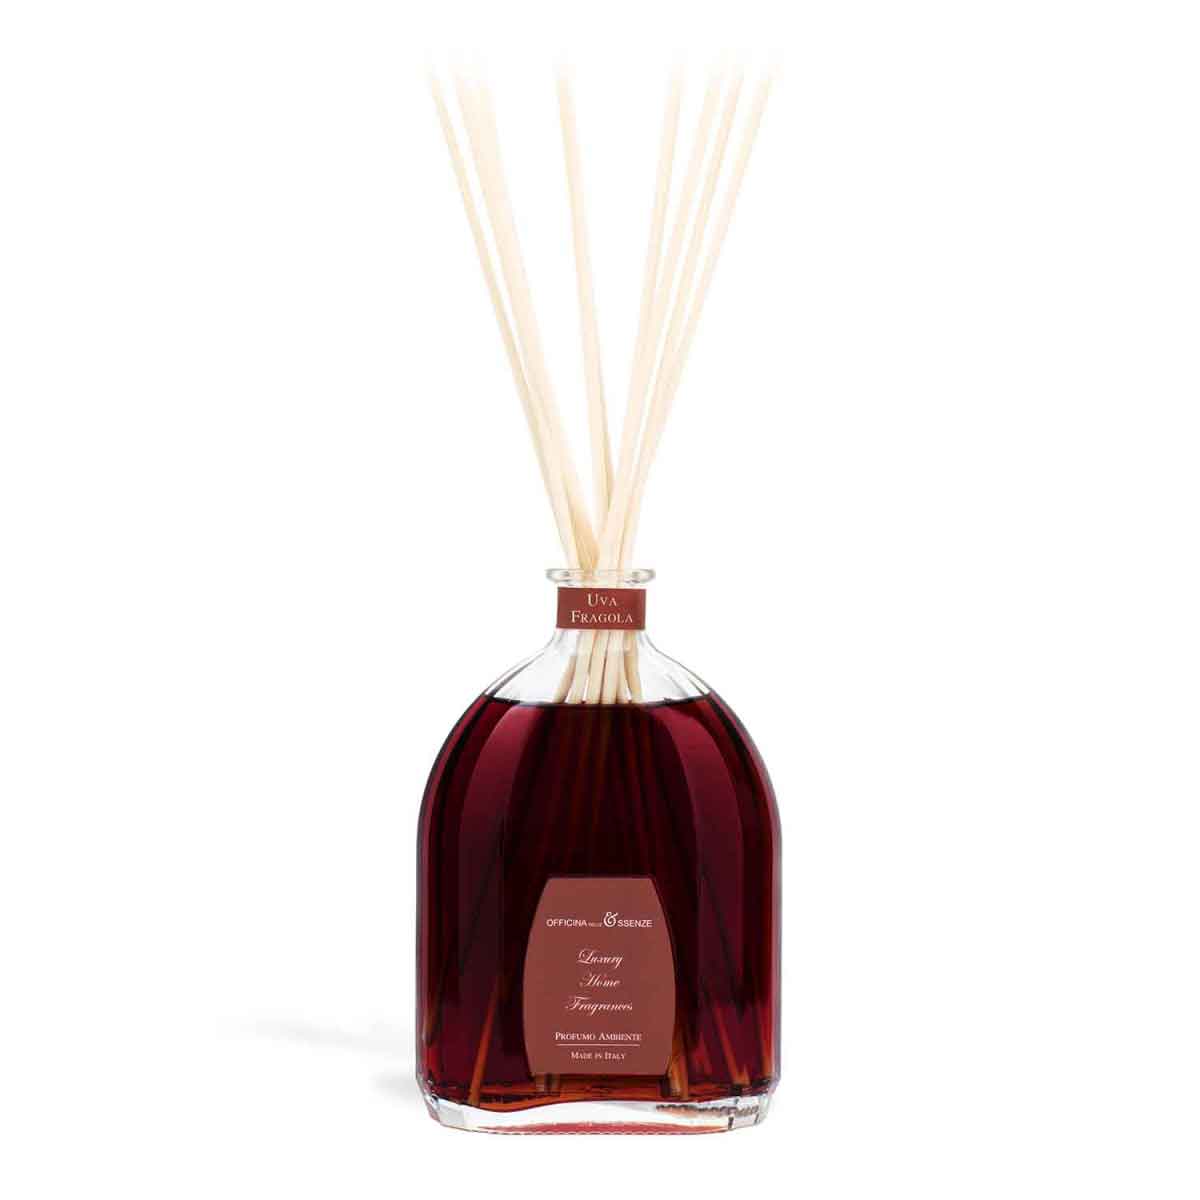 Strawberry & Grape home fragrance with reeds